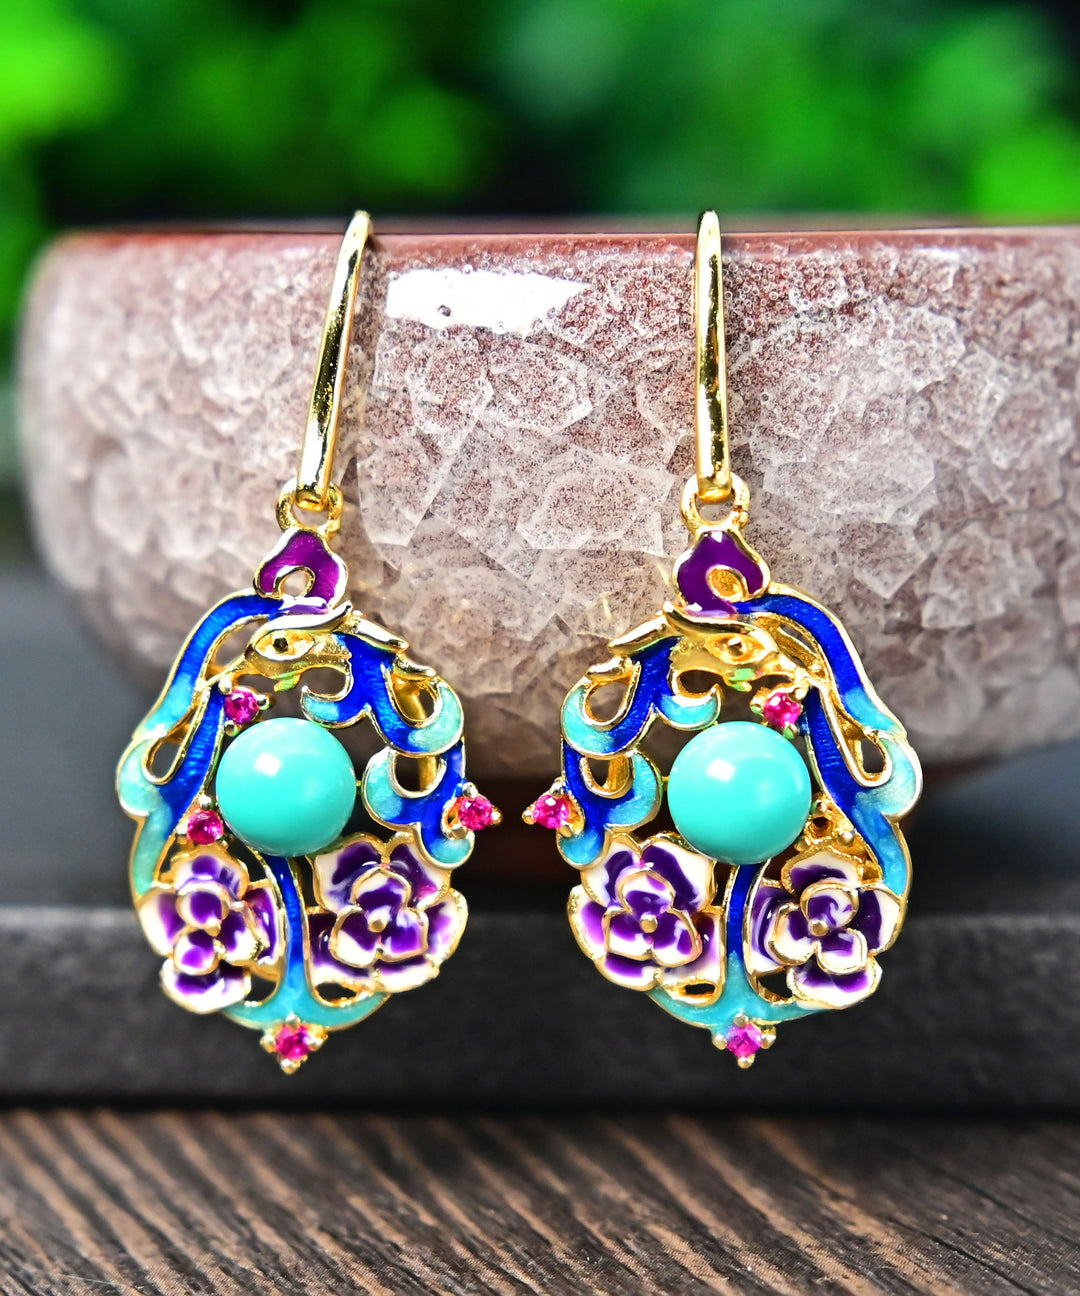 Casual Light Green Sterling Silver Overgild Cloisonne Turquoise Drop Earrings